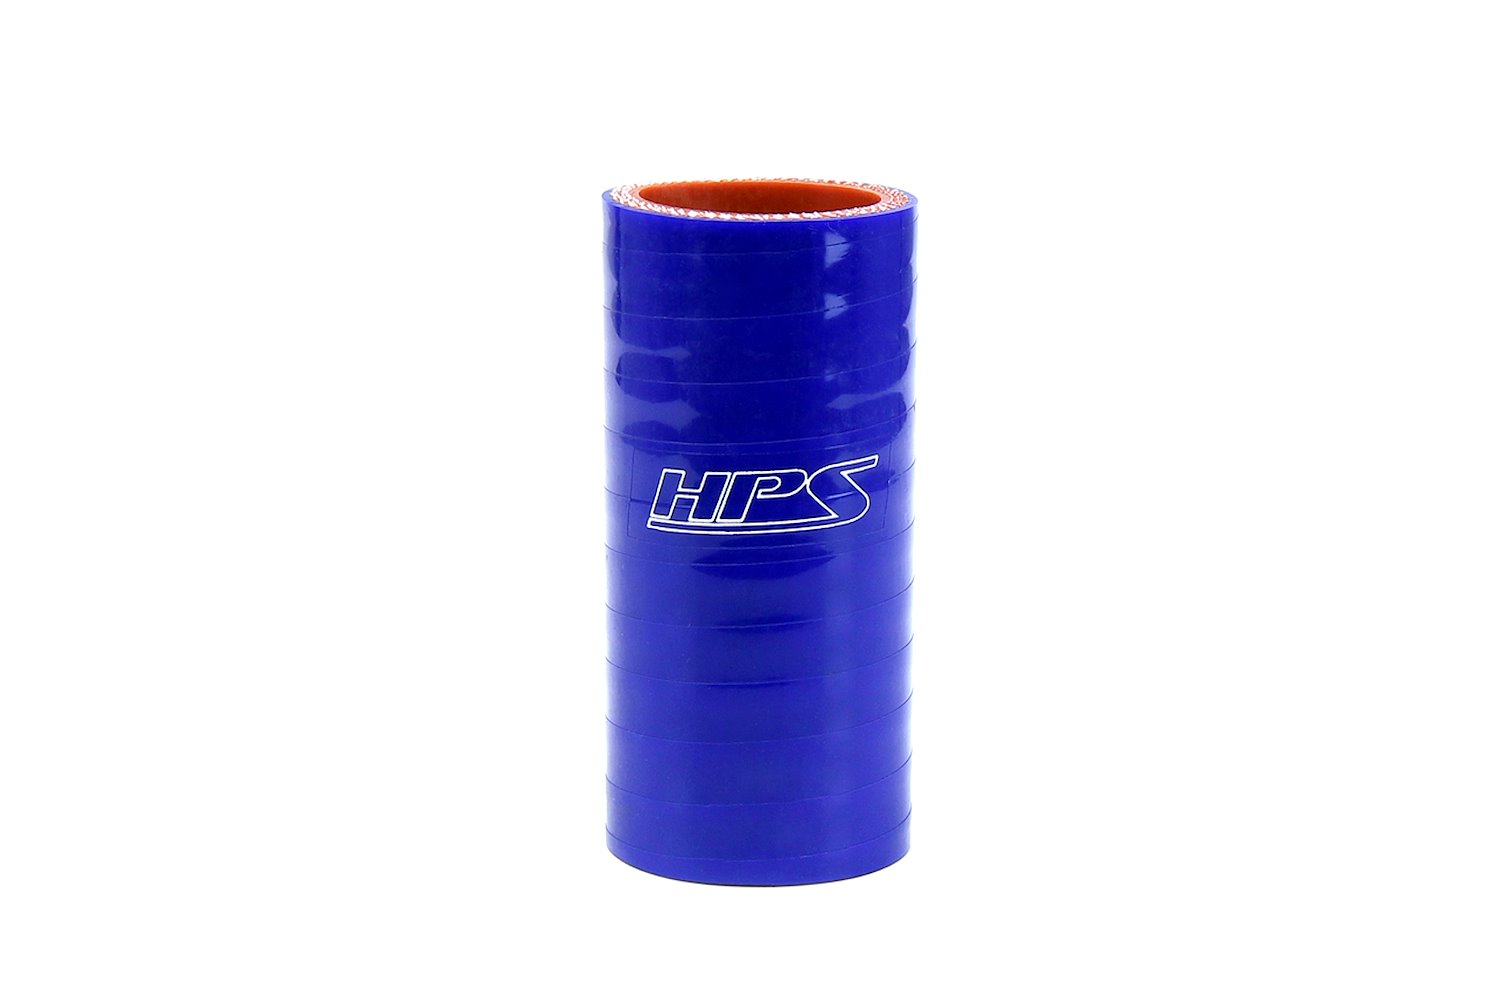 HTSC-150-L6-BLUE Silicone Coupler Hose, High-Temp 4-Ply Reinforced, 1-1/2 in. ID, 6 in. Long, Blue